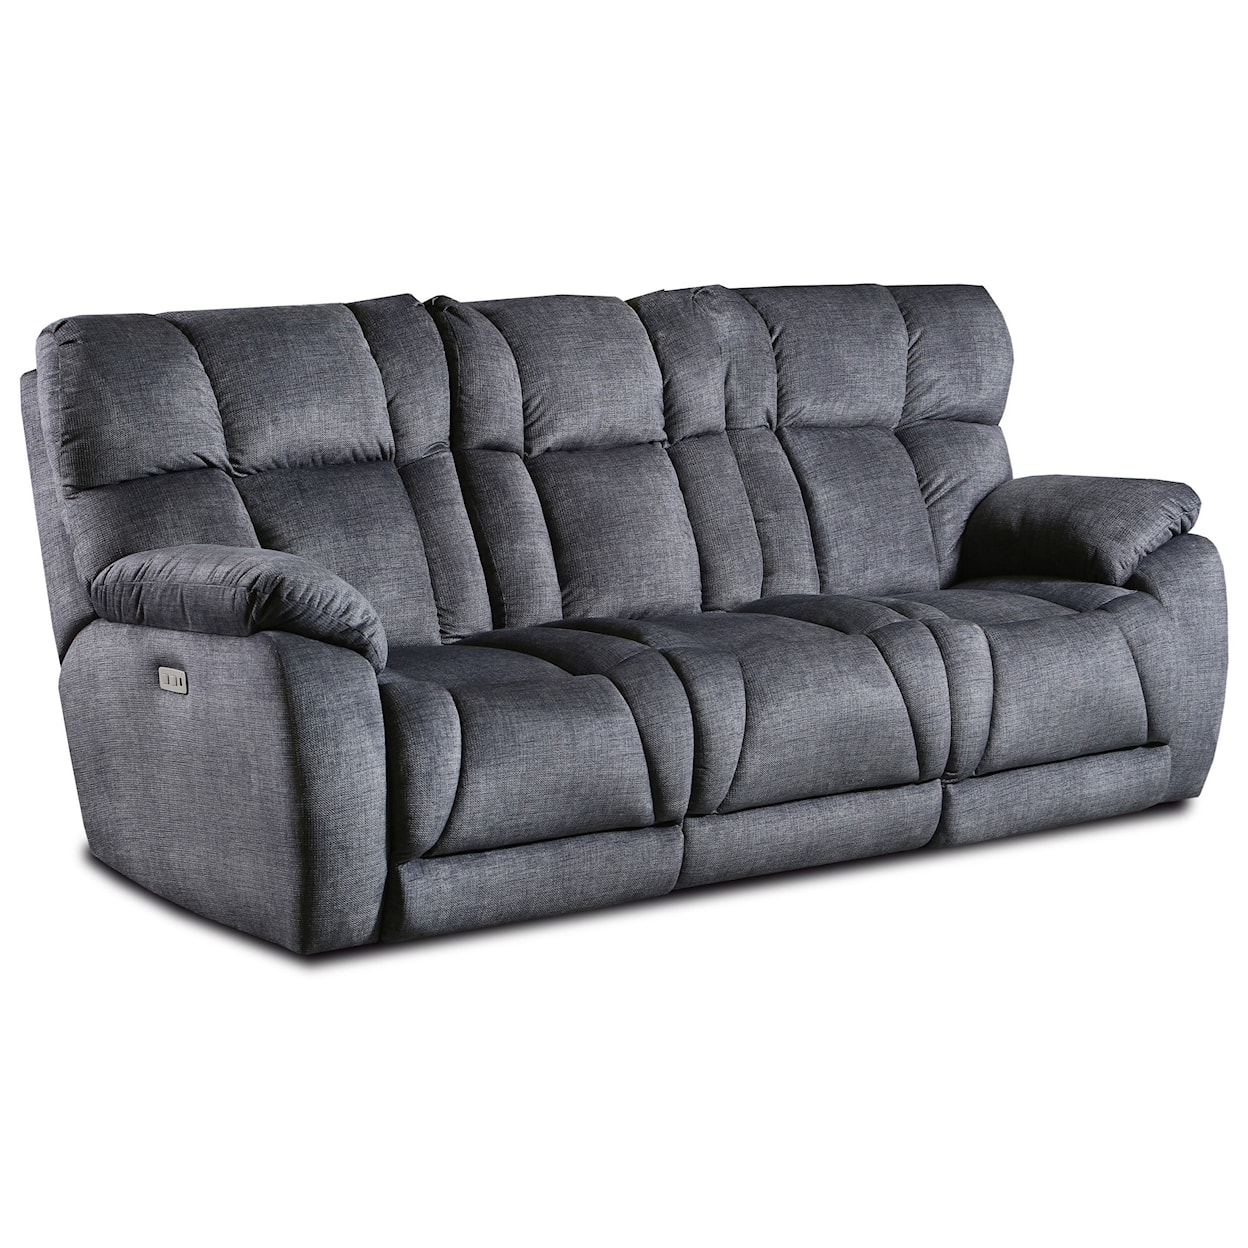 Design2Recline Wild Card Pwr Hdrest Dble Reclining Sofa With Next Lev